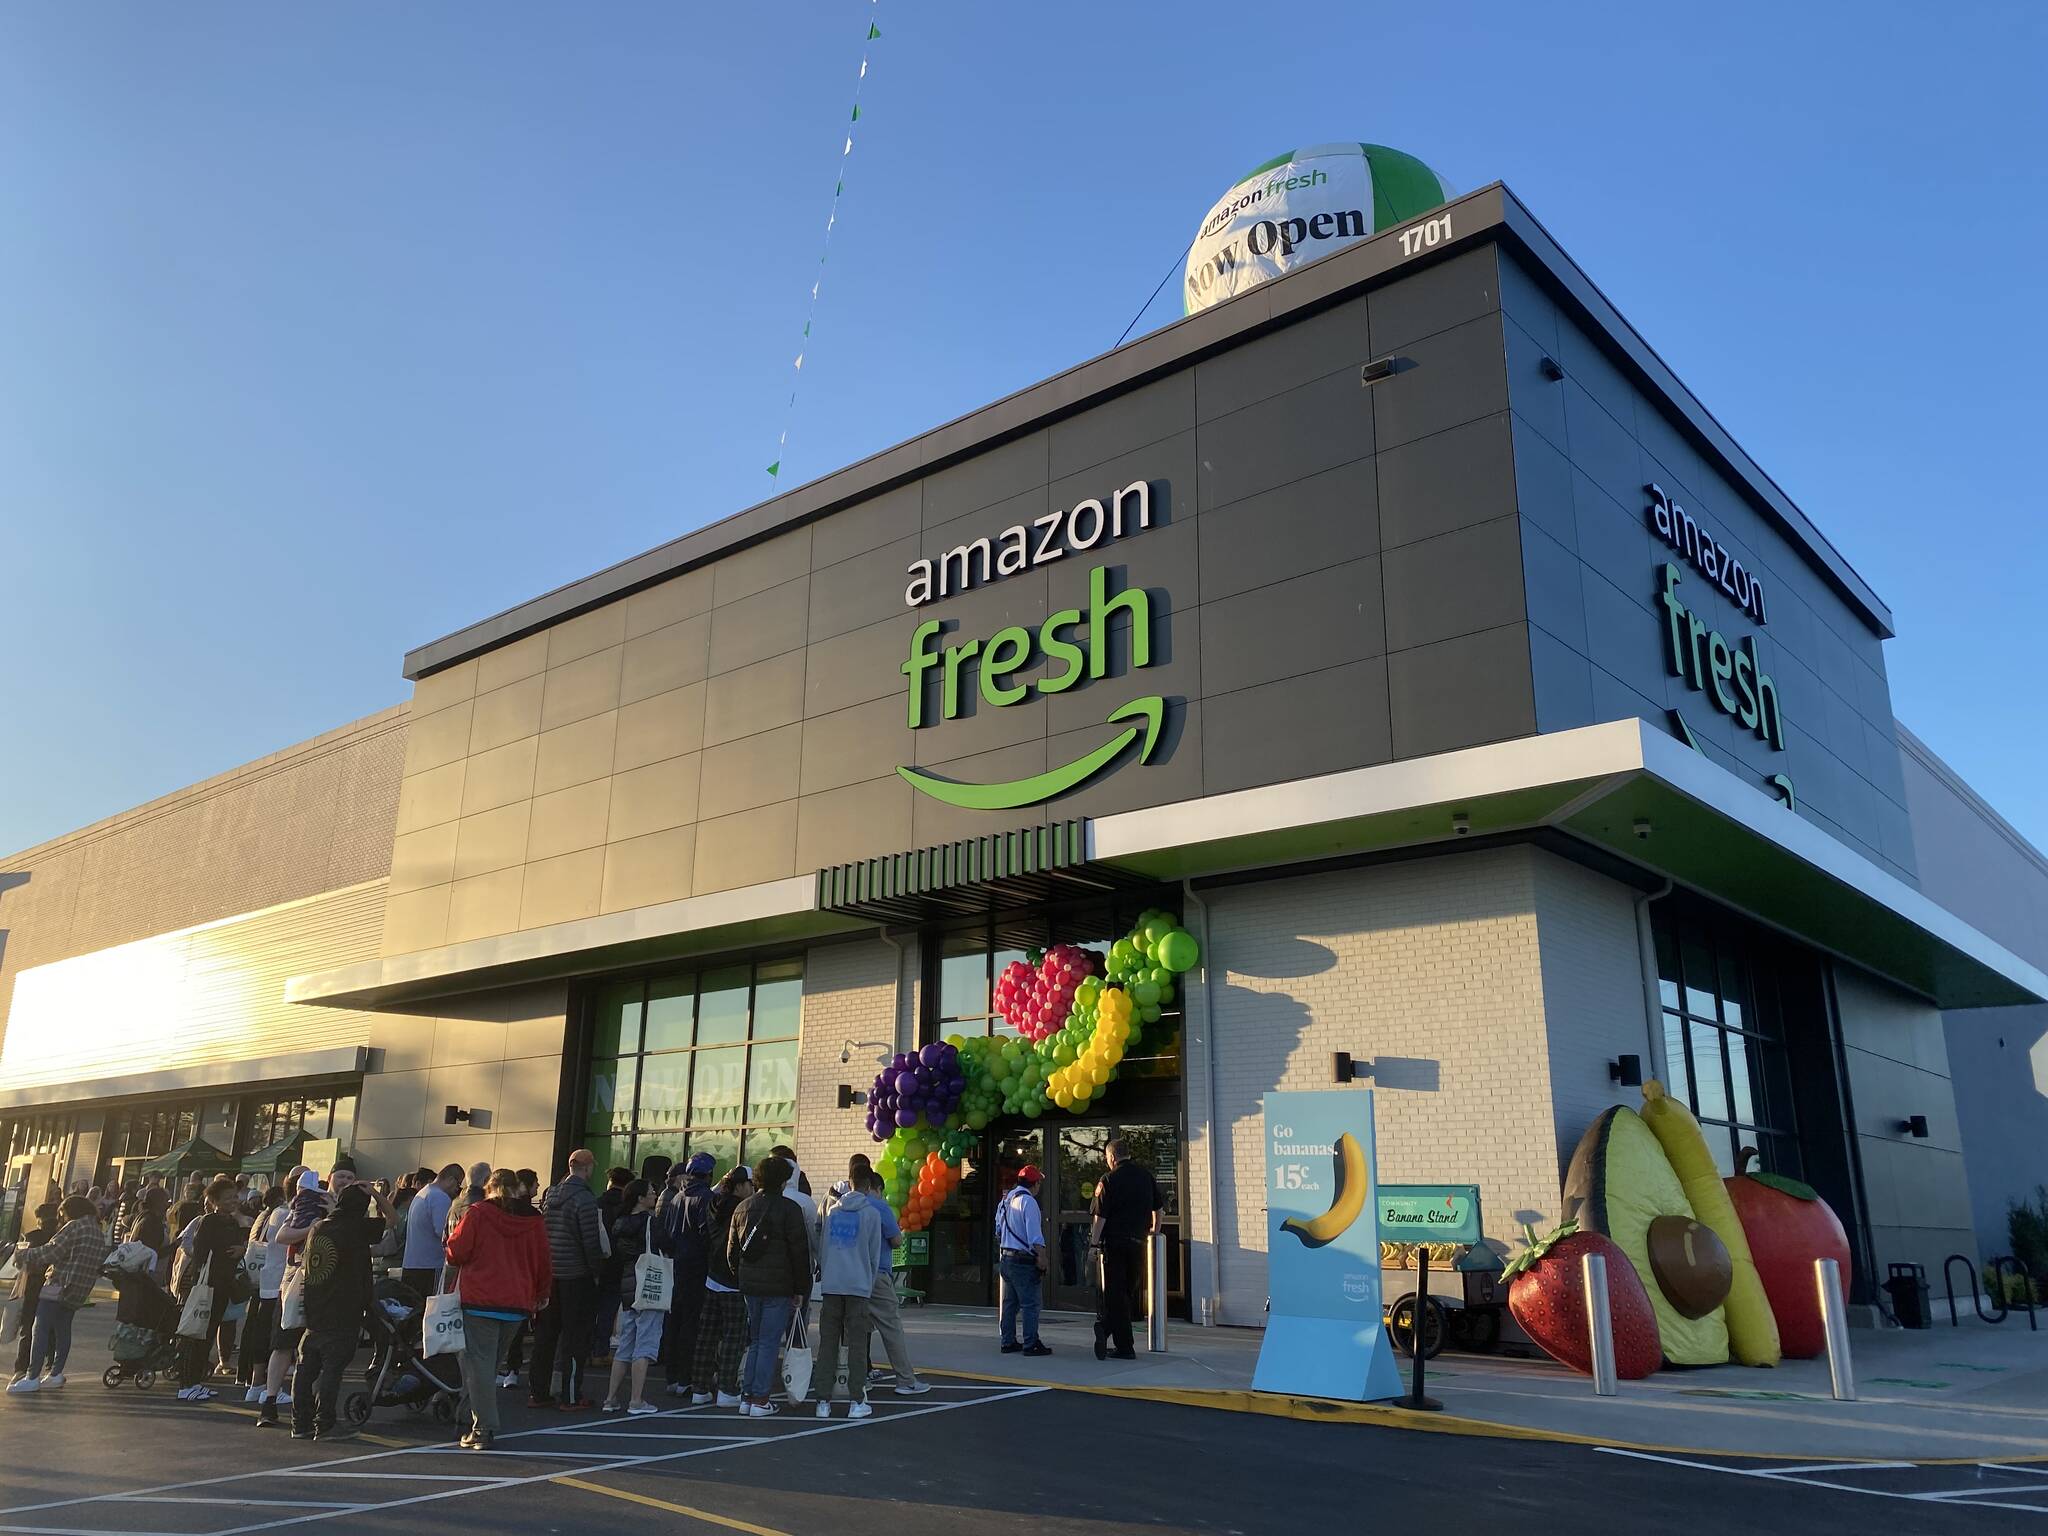 Amazon Fresh is located at 1701 S. Commons in Federal Way.